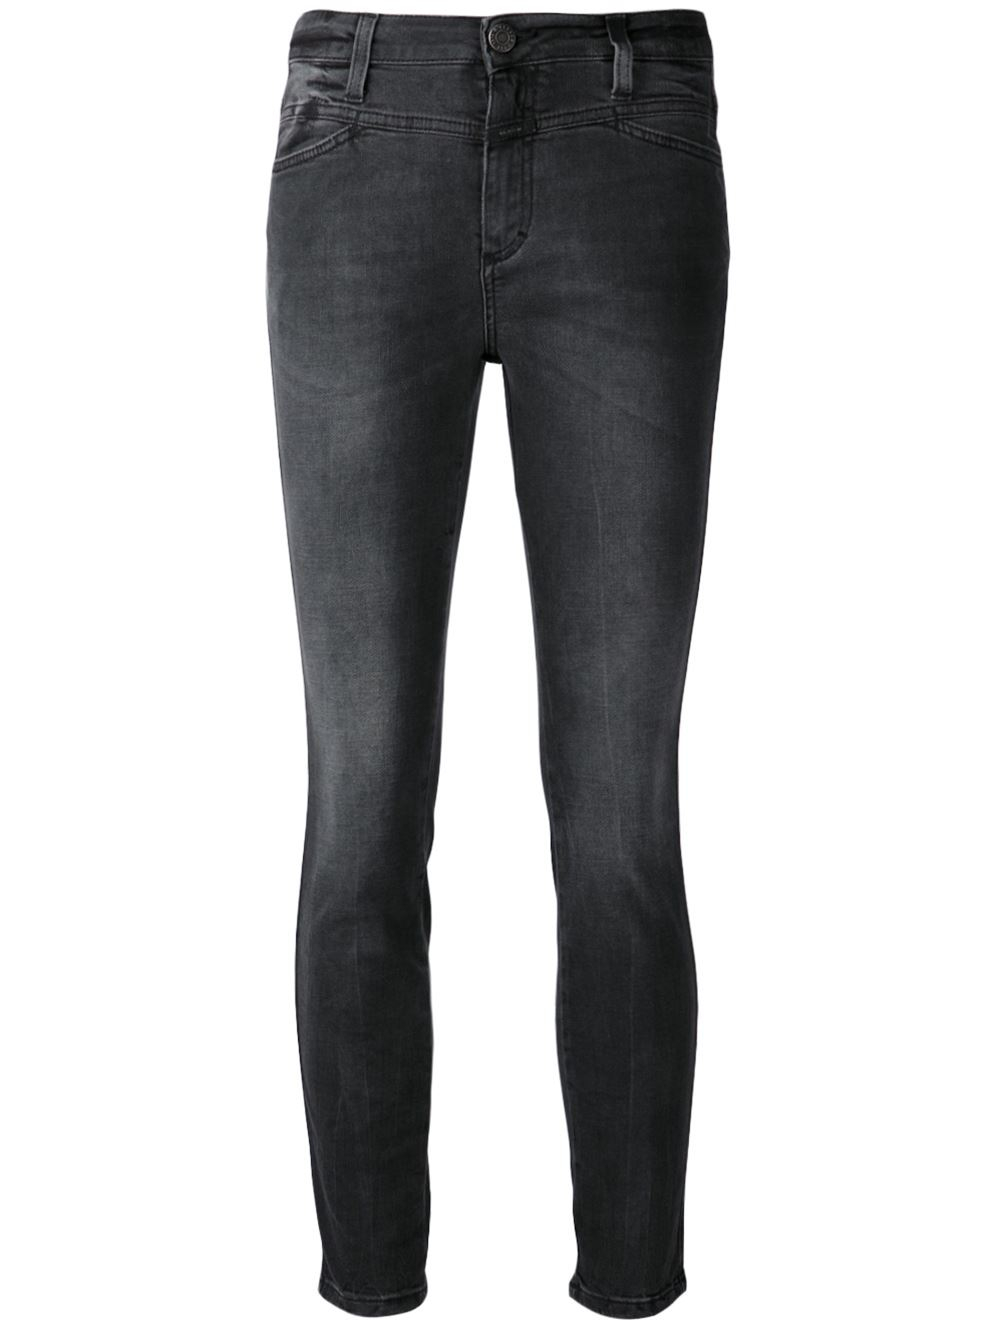 Lyst - Closed Skinny Pusher Jeans in Black